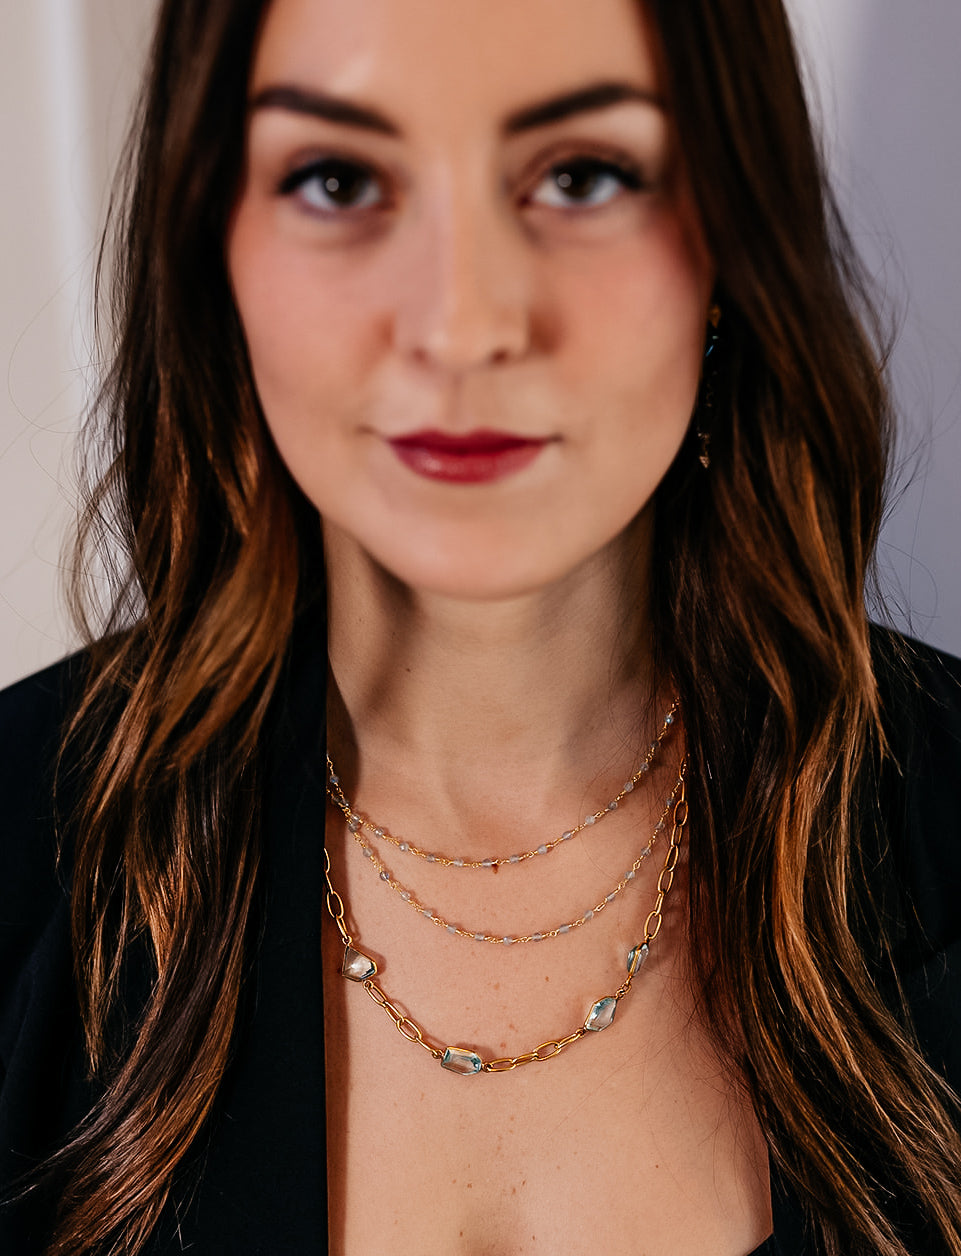 A model wearing a delicate two strand labradorite bead necklace.